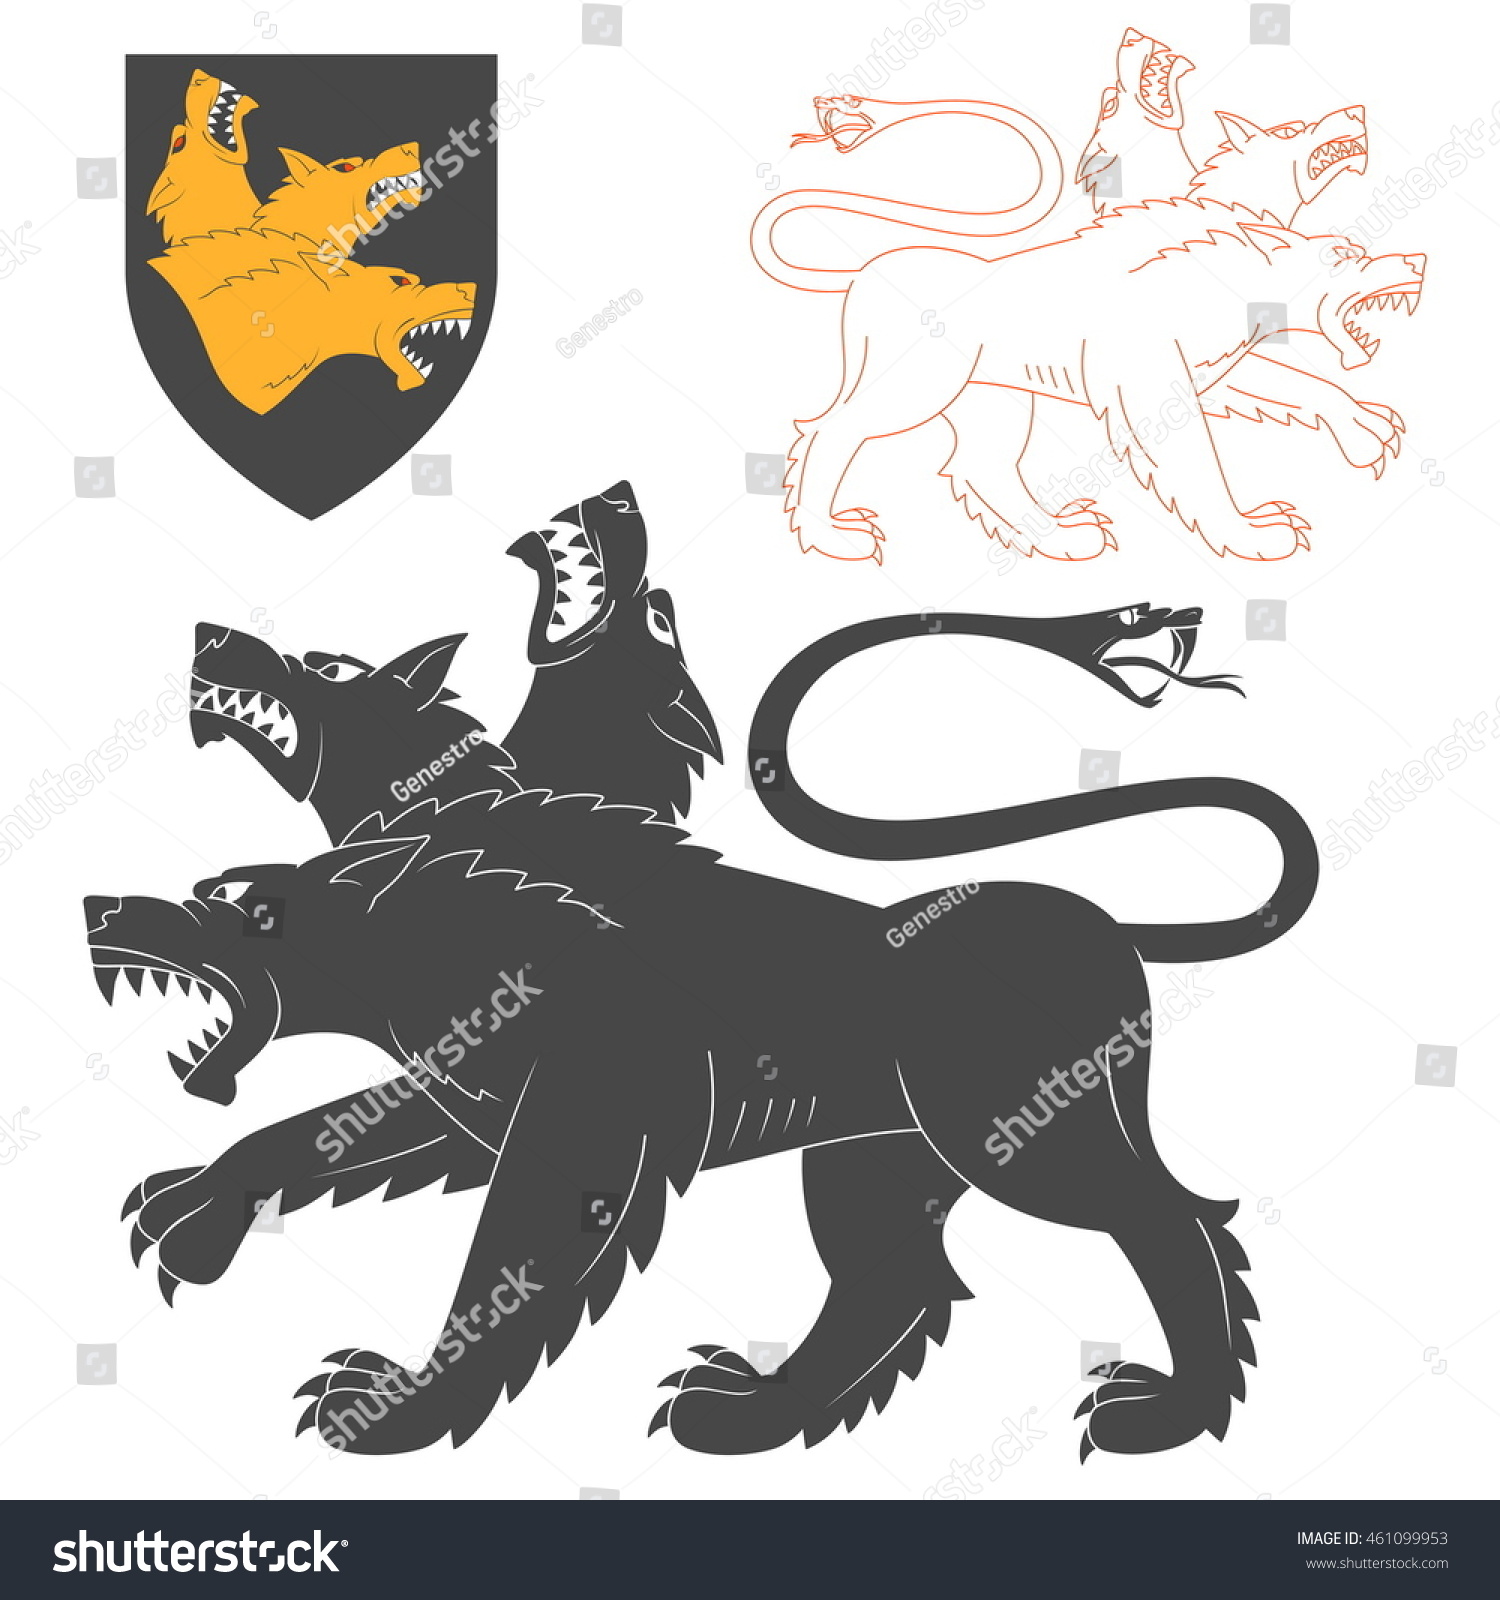 SVG of Black Cerberus Illustration For Heraldry Or Tattoo Design Isolated On White Background. Heraldic Symbols And Elements svg